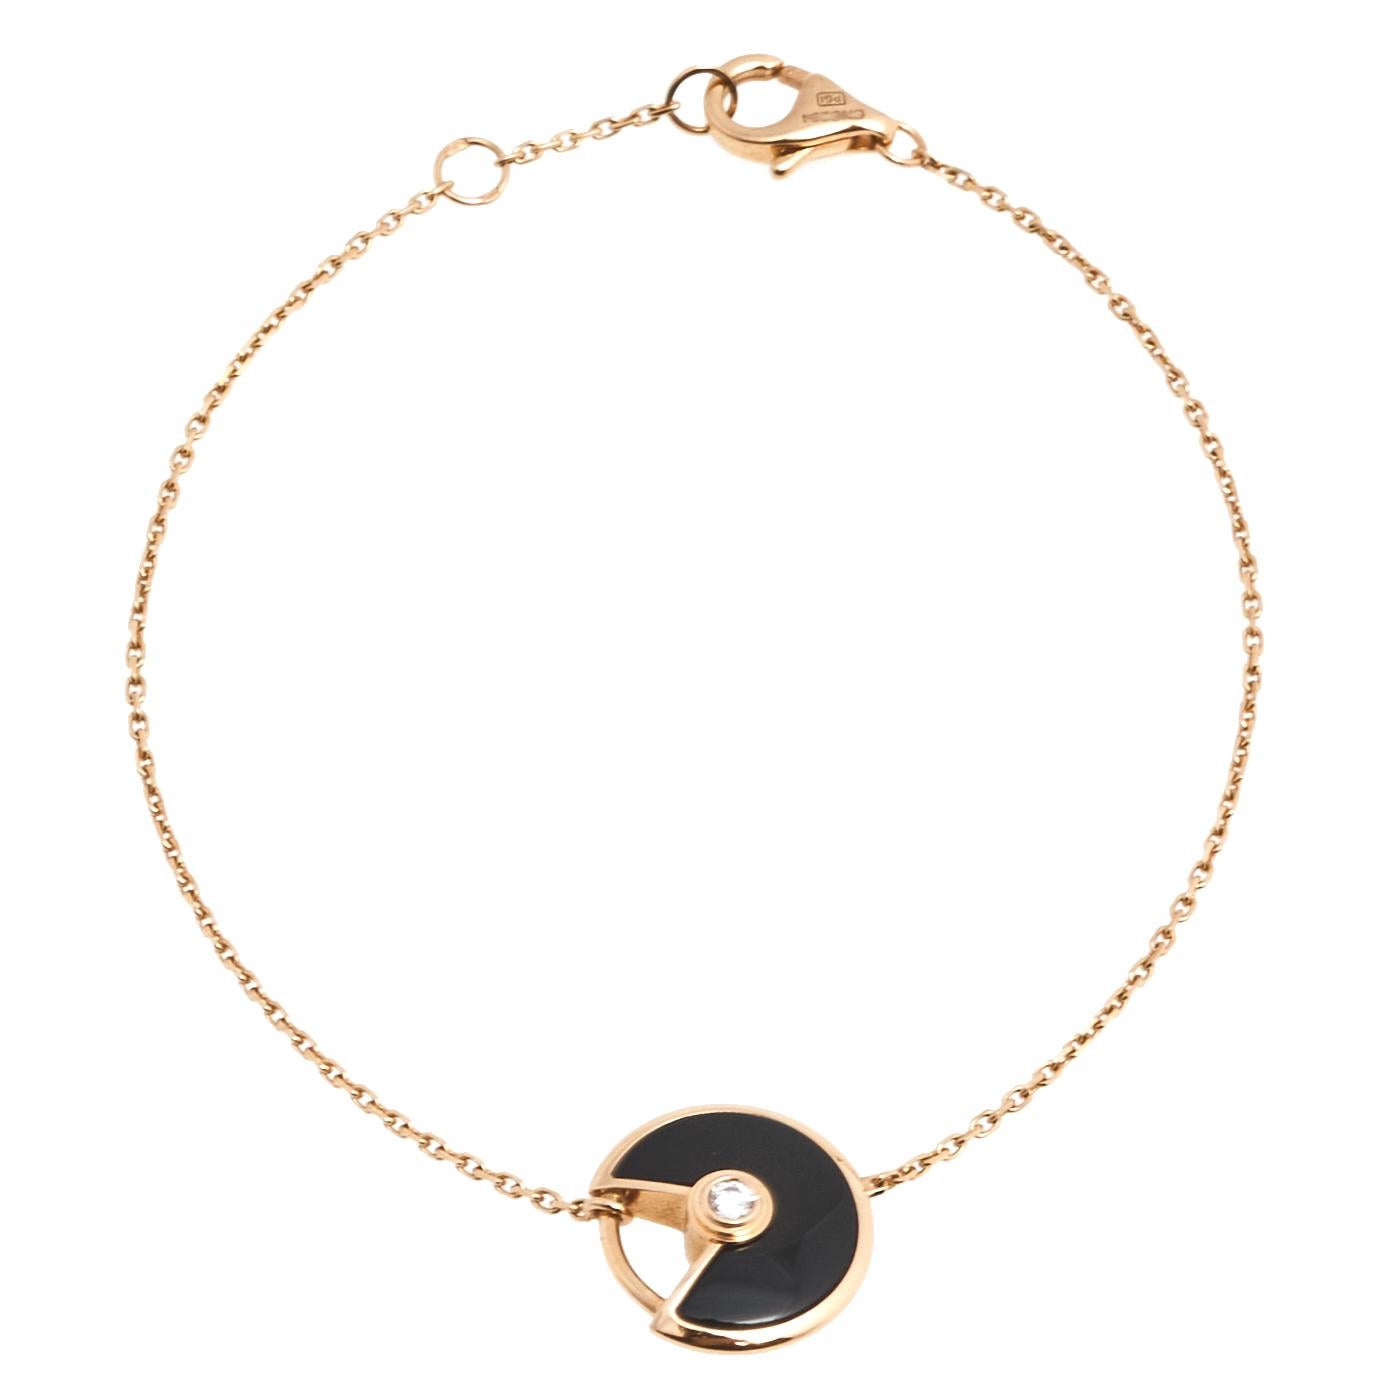 The elegant and sophisticated designs from Cartier are loved by everyone, and this Amulette de Cartier bracelet is subtly elegant as well as beautifully luxurious. Constructed in 18K rose gold, this bracelet features a disc charm that is inlaid with